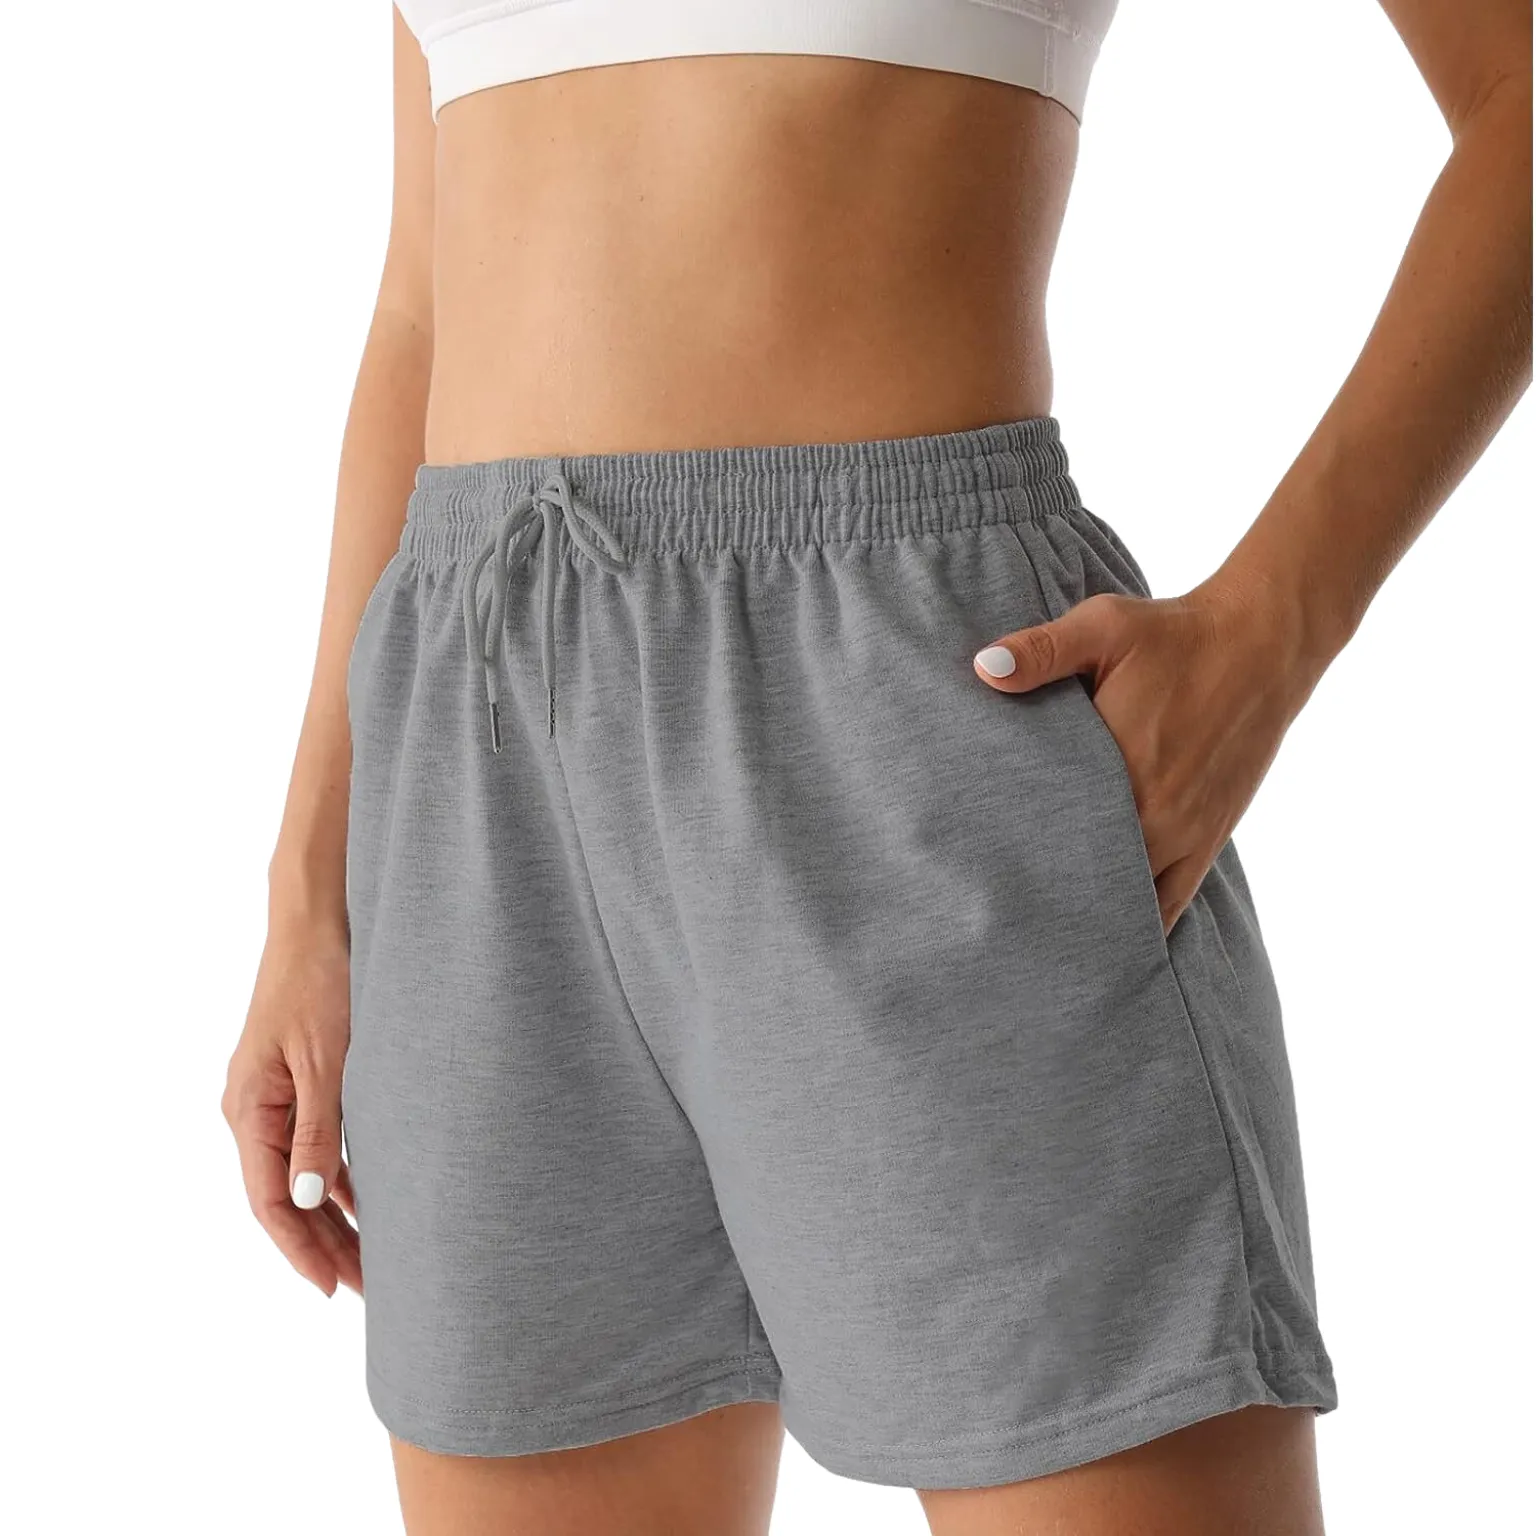 Drawstring Shorts manufacturing with trendy design